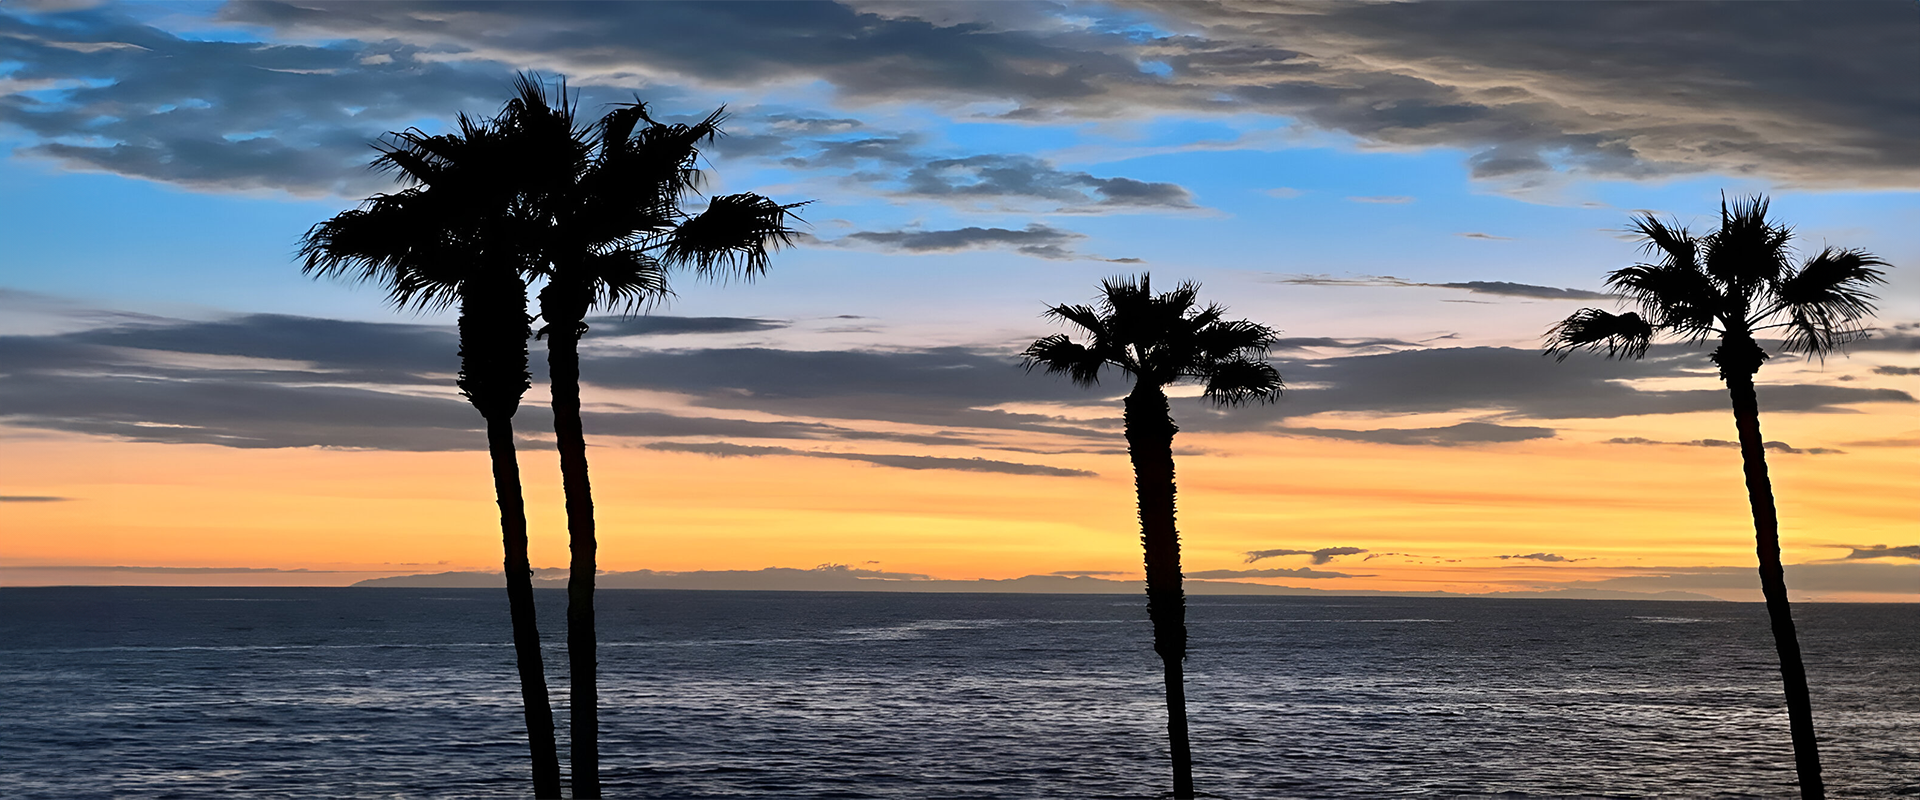 Two palm trees are in front of the ocean.